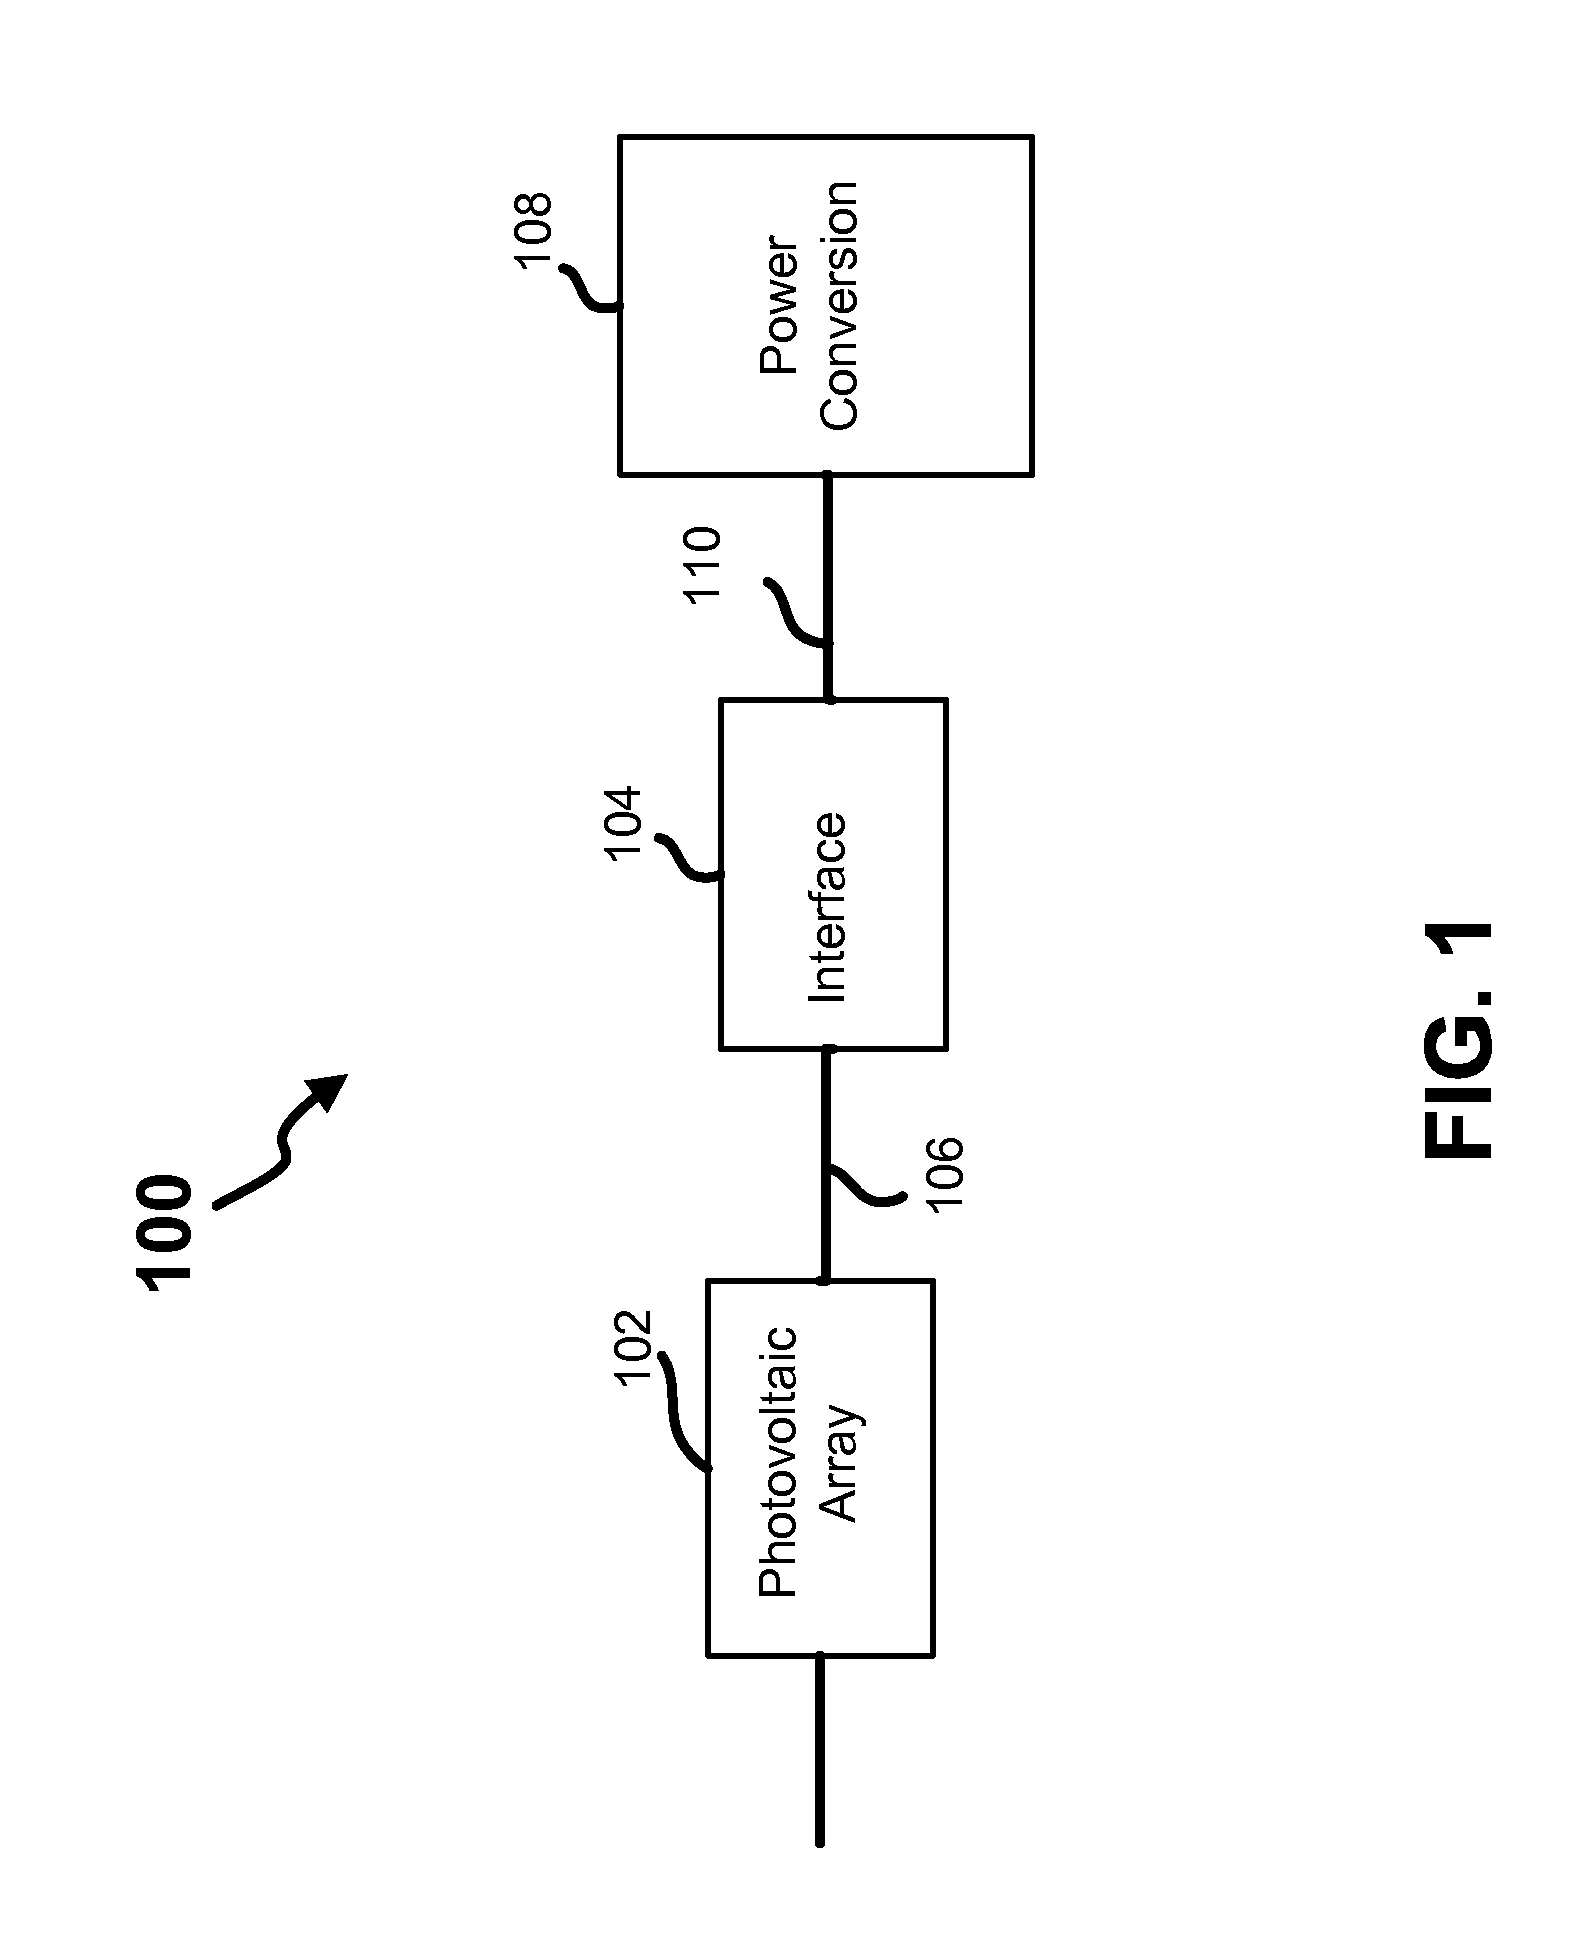 Device, system, and method for managing an application of power from photovoltaic arrays